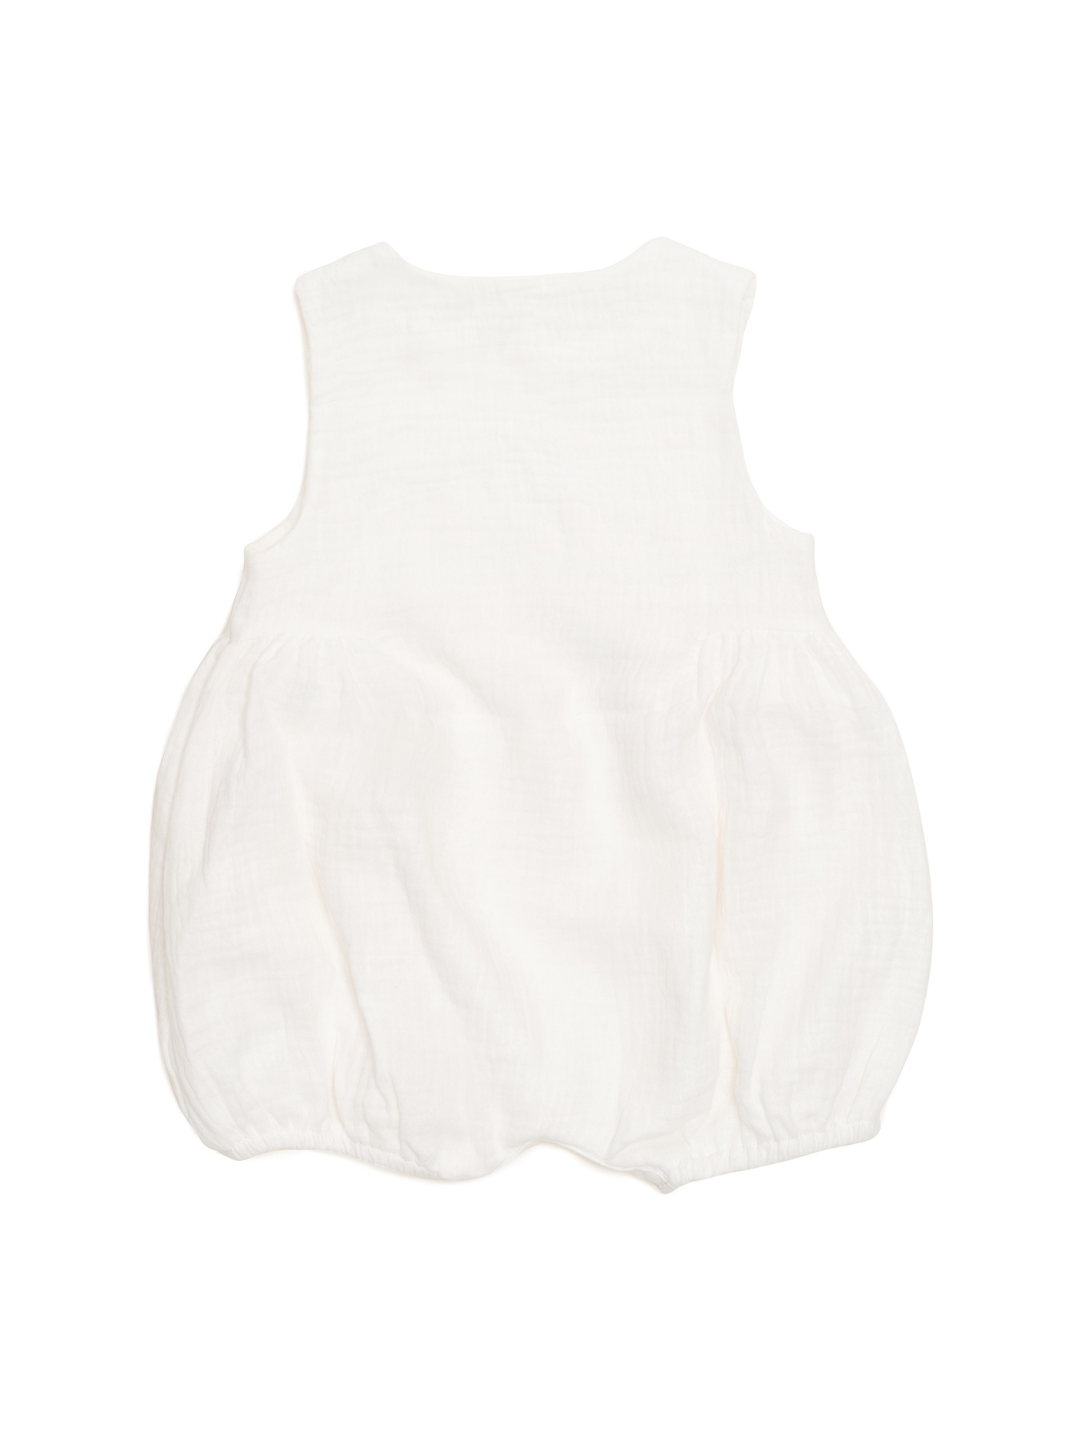 organic cotton muslin baby romper infant clothing kids romper for toddlers cute trendy kids fashion